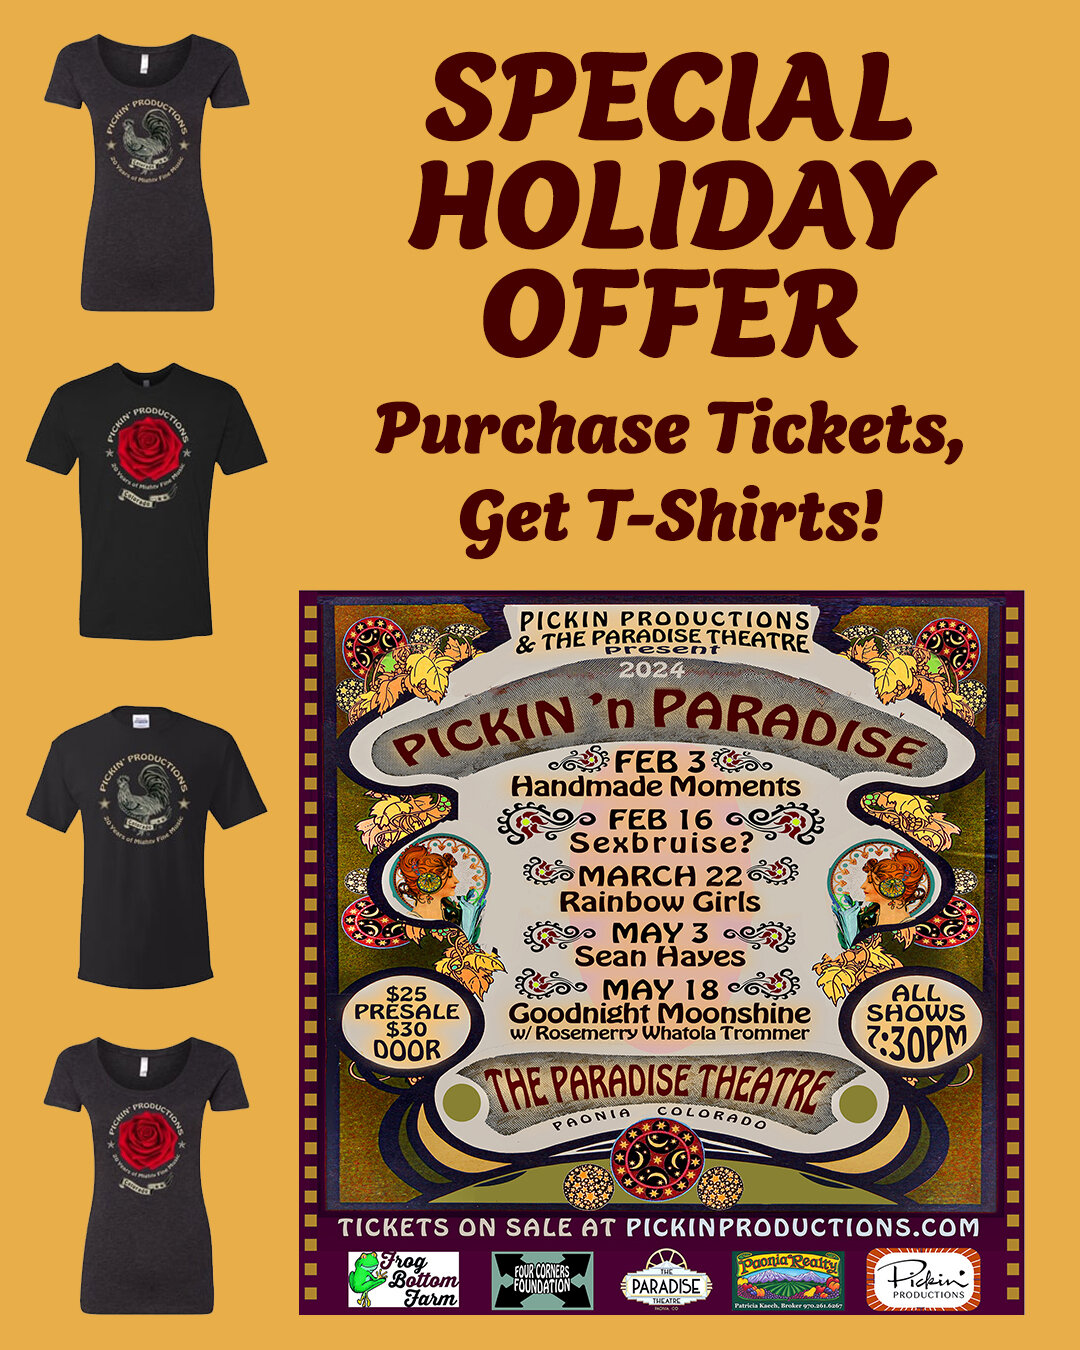 Special Holiday Offer from Pickin' Productions: Purchase Tickets, Get T-Shirts!

Purchase tickets to all 5 of our upcoming Pickin &rsquo;n Paradise concerts at Paradise Theatre of Paonia and receive free Pickin&rsquo; Productions anniversary T-shirts